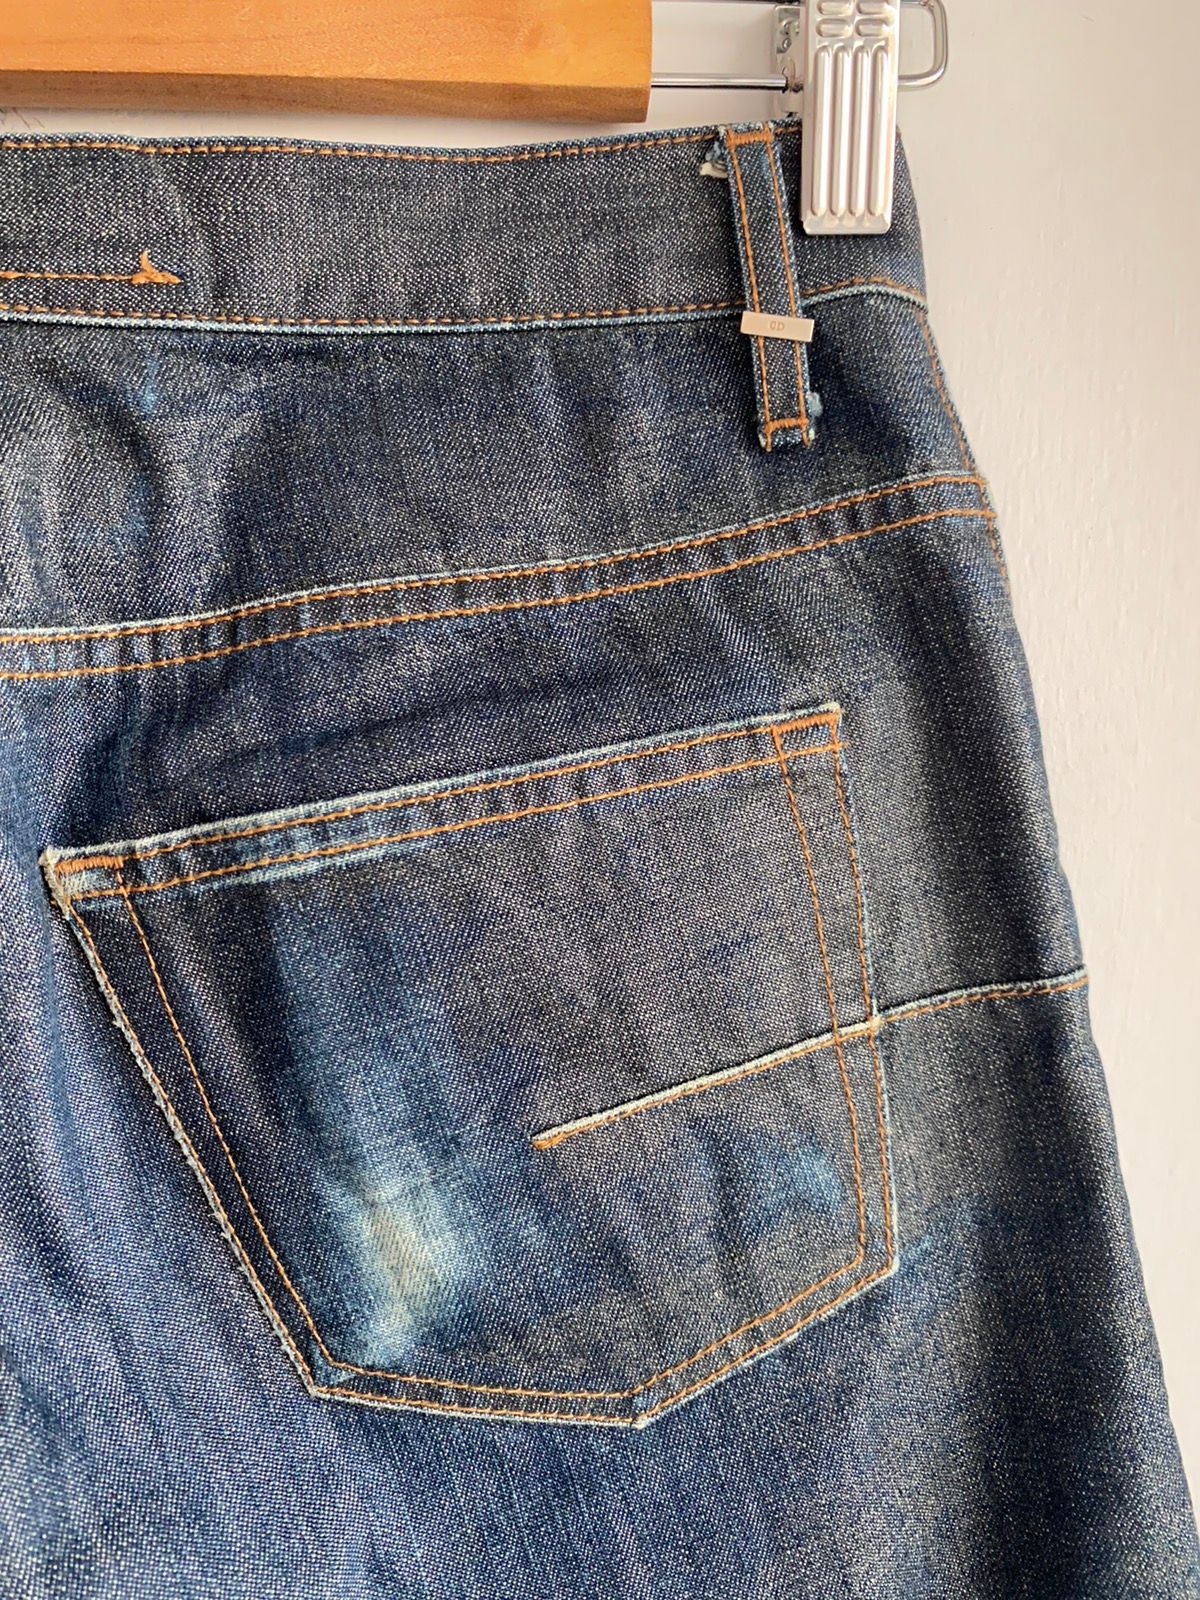 Dior Homme 07 WAX Coated MIJ Blue Jeans Waxed